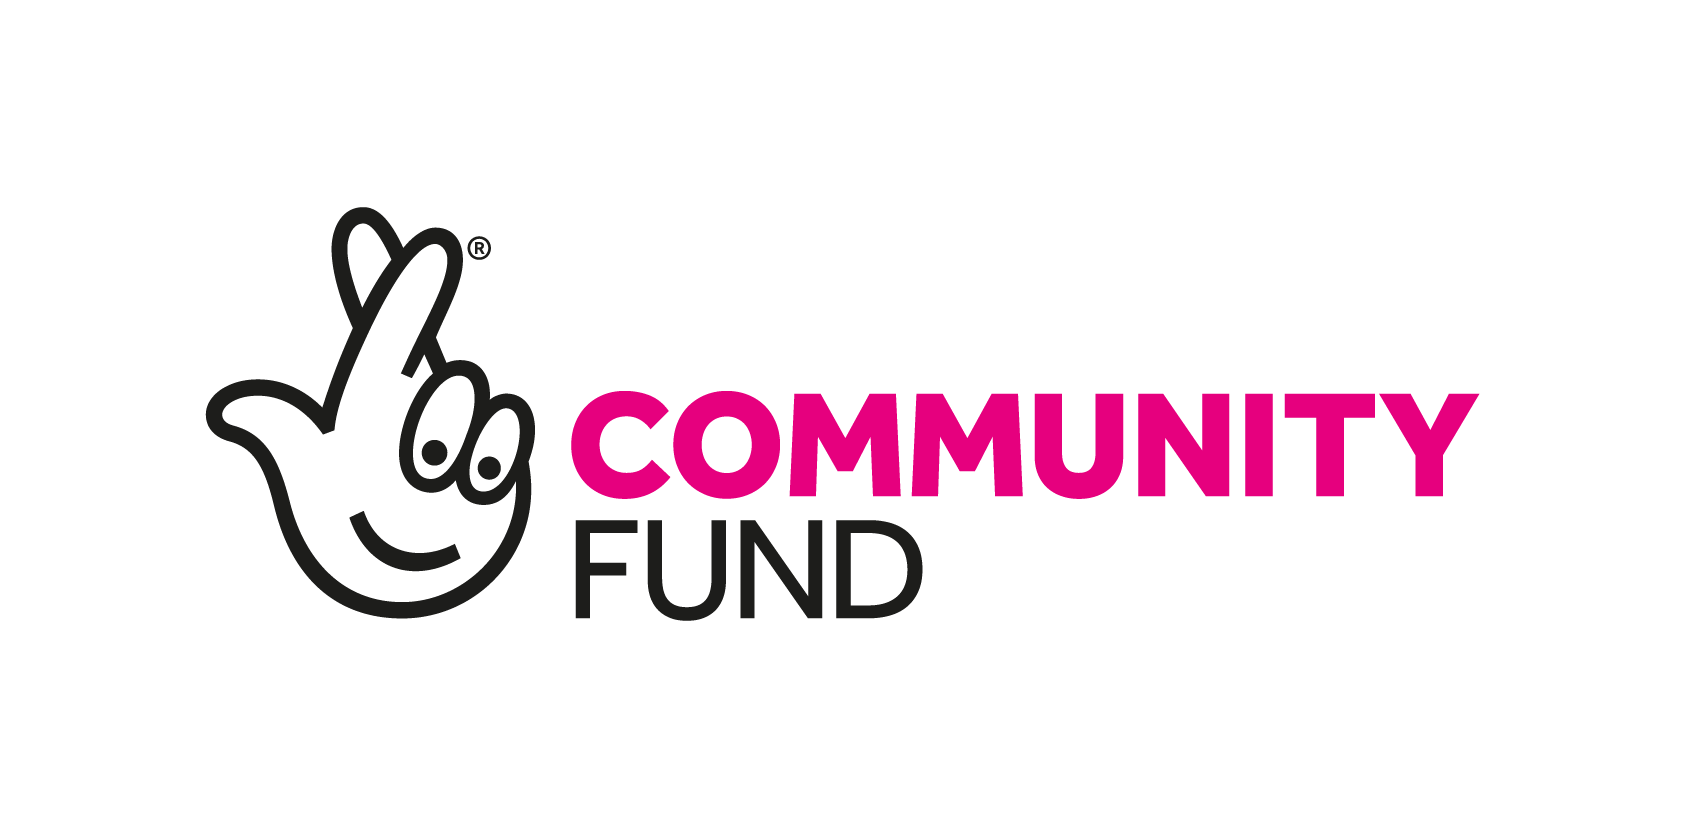 National Lottery Community Fund Logo showing a hand with fingers crossed for luck